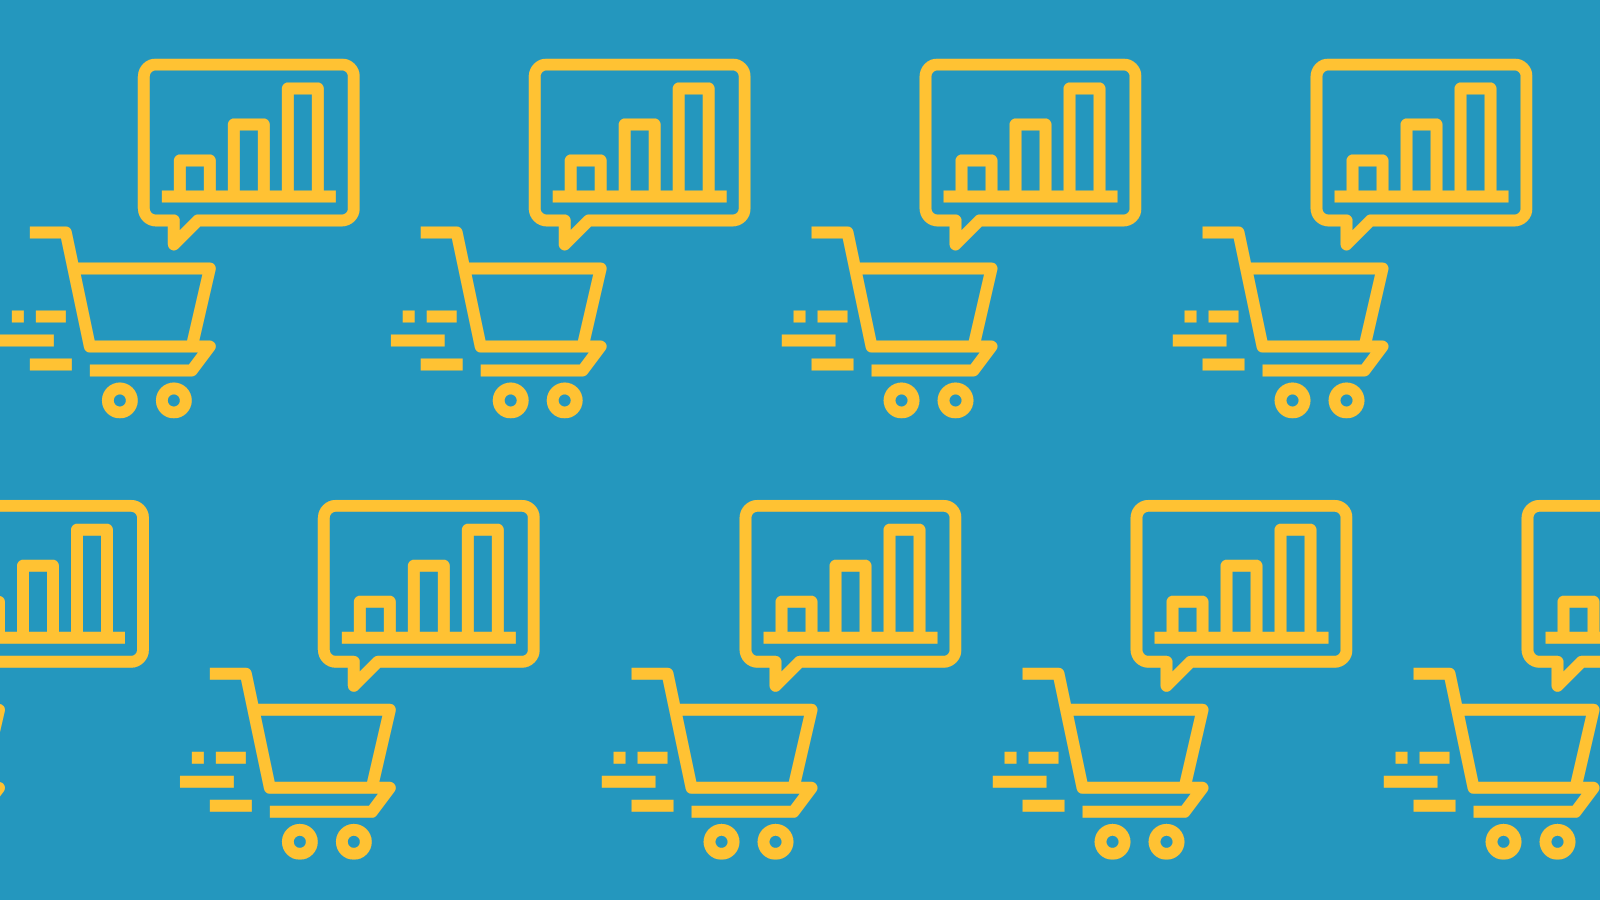 A repeating pattern of graphics of a shopping cart and a speech bubble with an upward bar graph in it